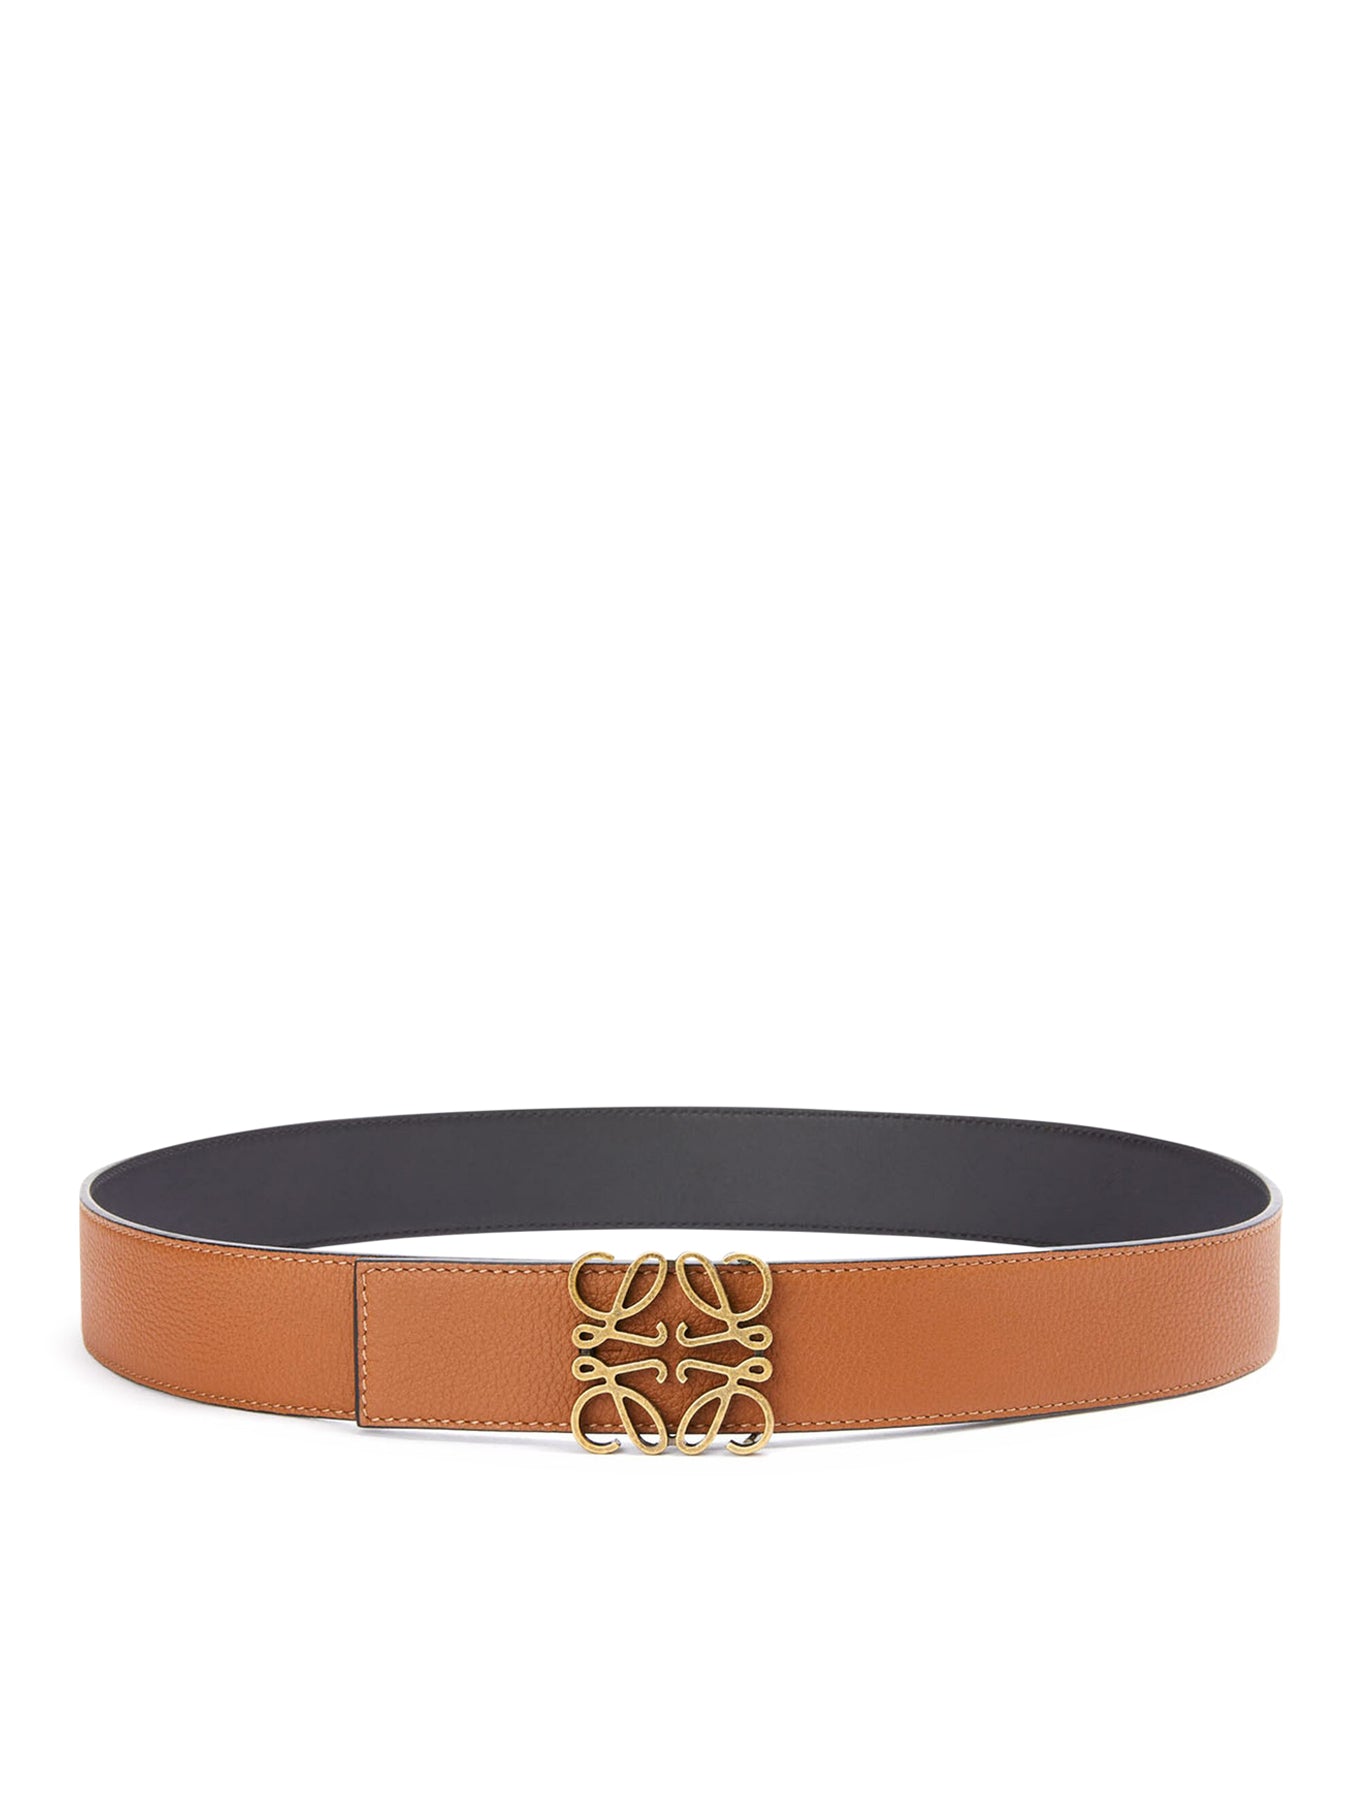 Reversible Anagram belt in soft grained calfskin and smooth calfskin